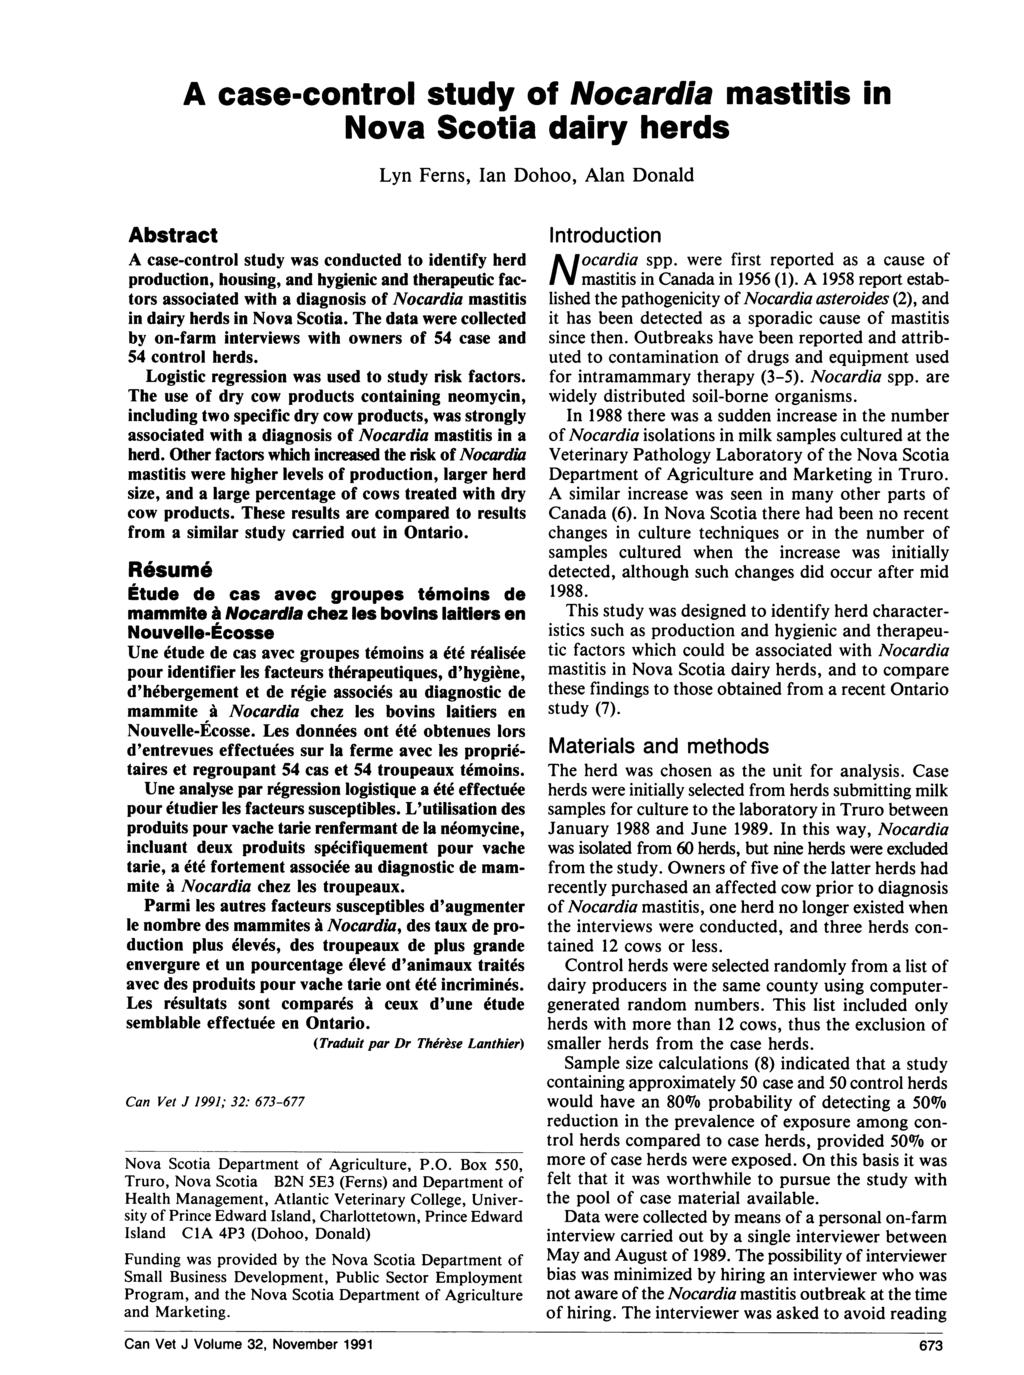 A case-control study of Nocardia mastitis in Nova Scotia dairy herds Lyn Ferns, Ian Dohoo, Alan Donald Abstract A case-control study was conducted to identify herd production, housing, and hygienic